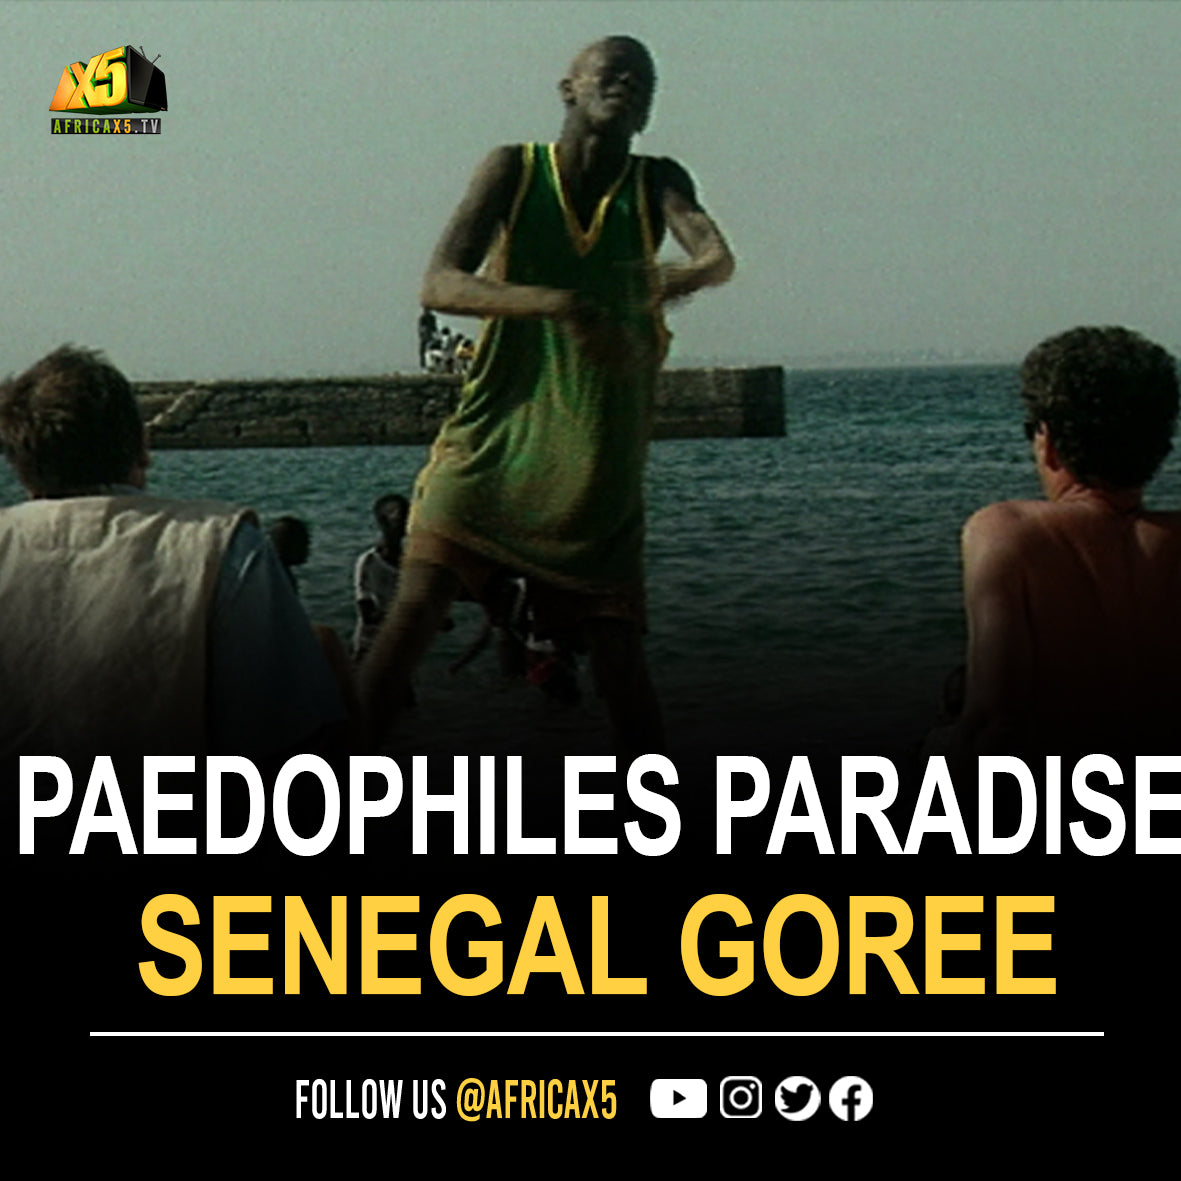 Paradise for Paedophiles. The Senegalese island of Goree is, by all accounts, paradise. The UNESCO World Heritage Site with a dark history of slaving has recently been blighted by a new problem: it has become a haven for paedophilia.